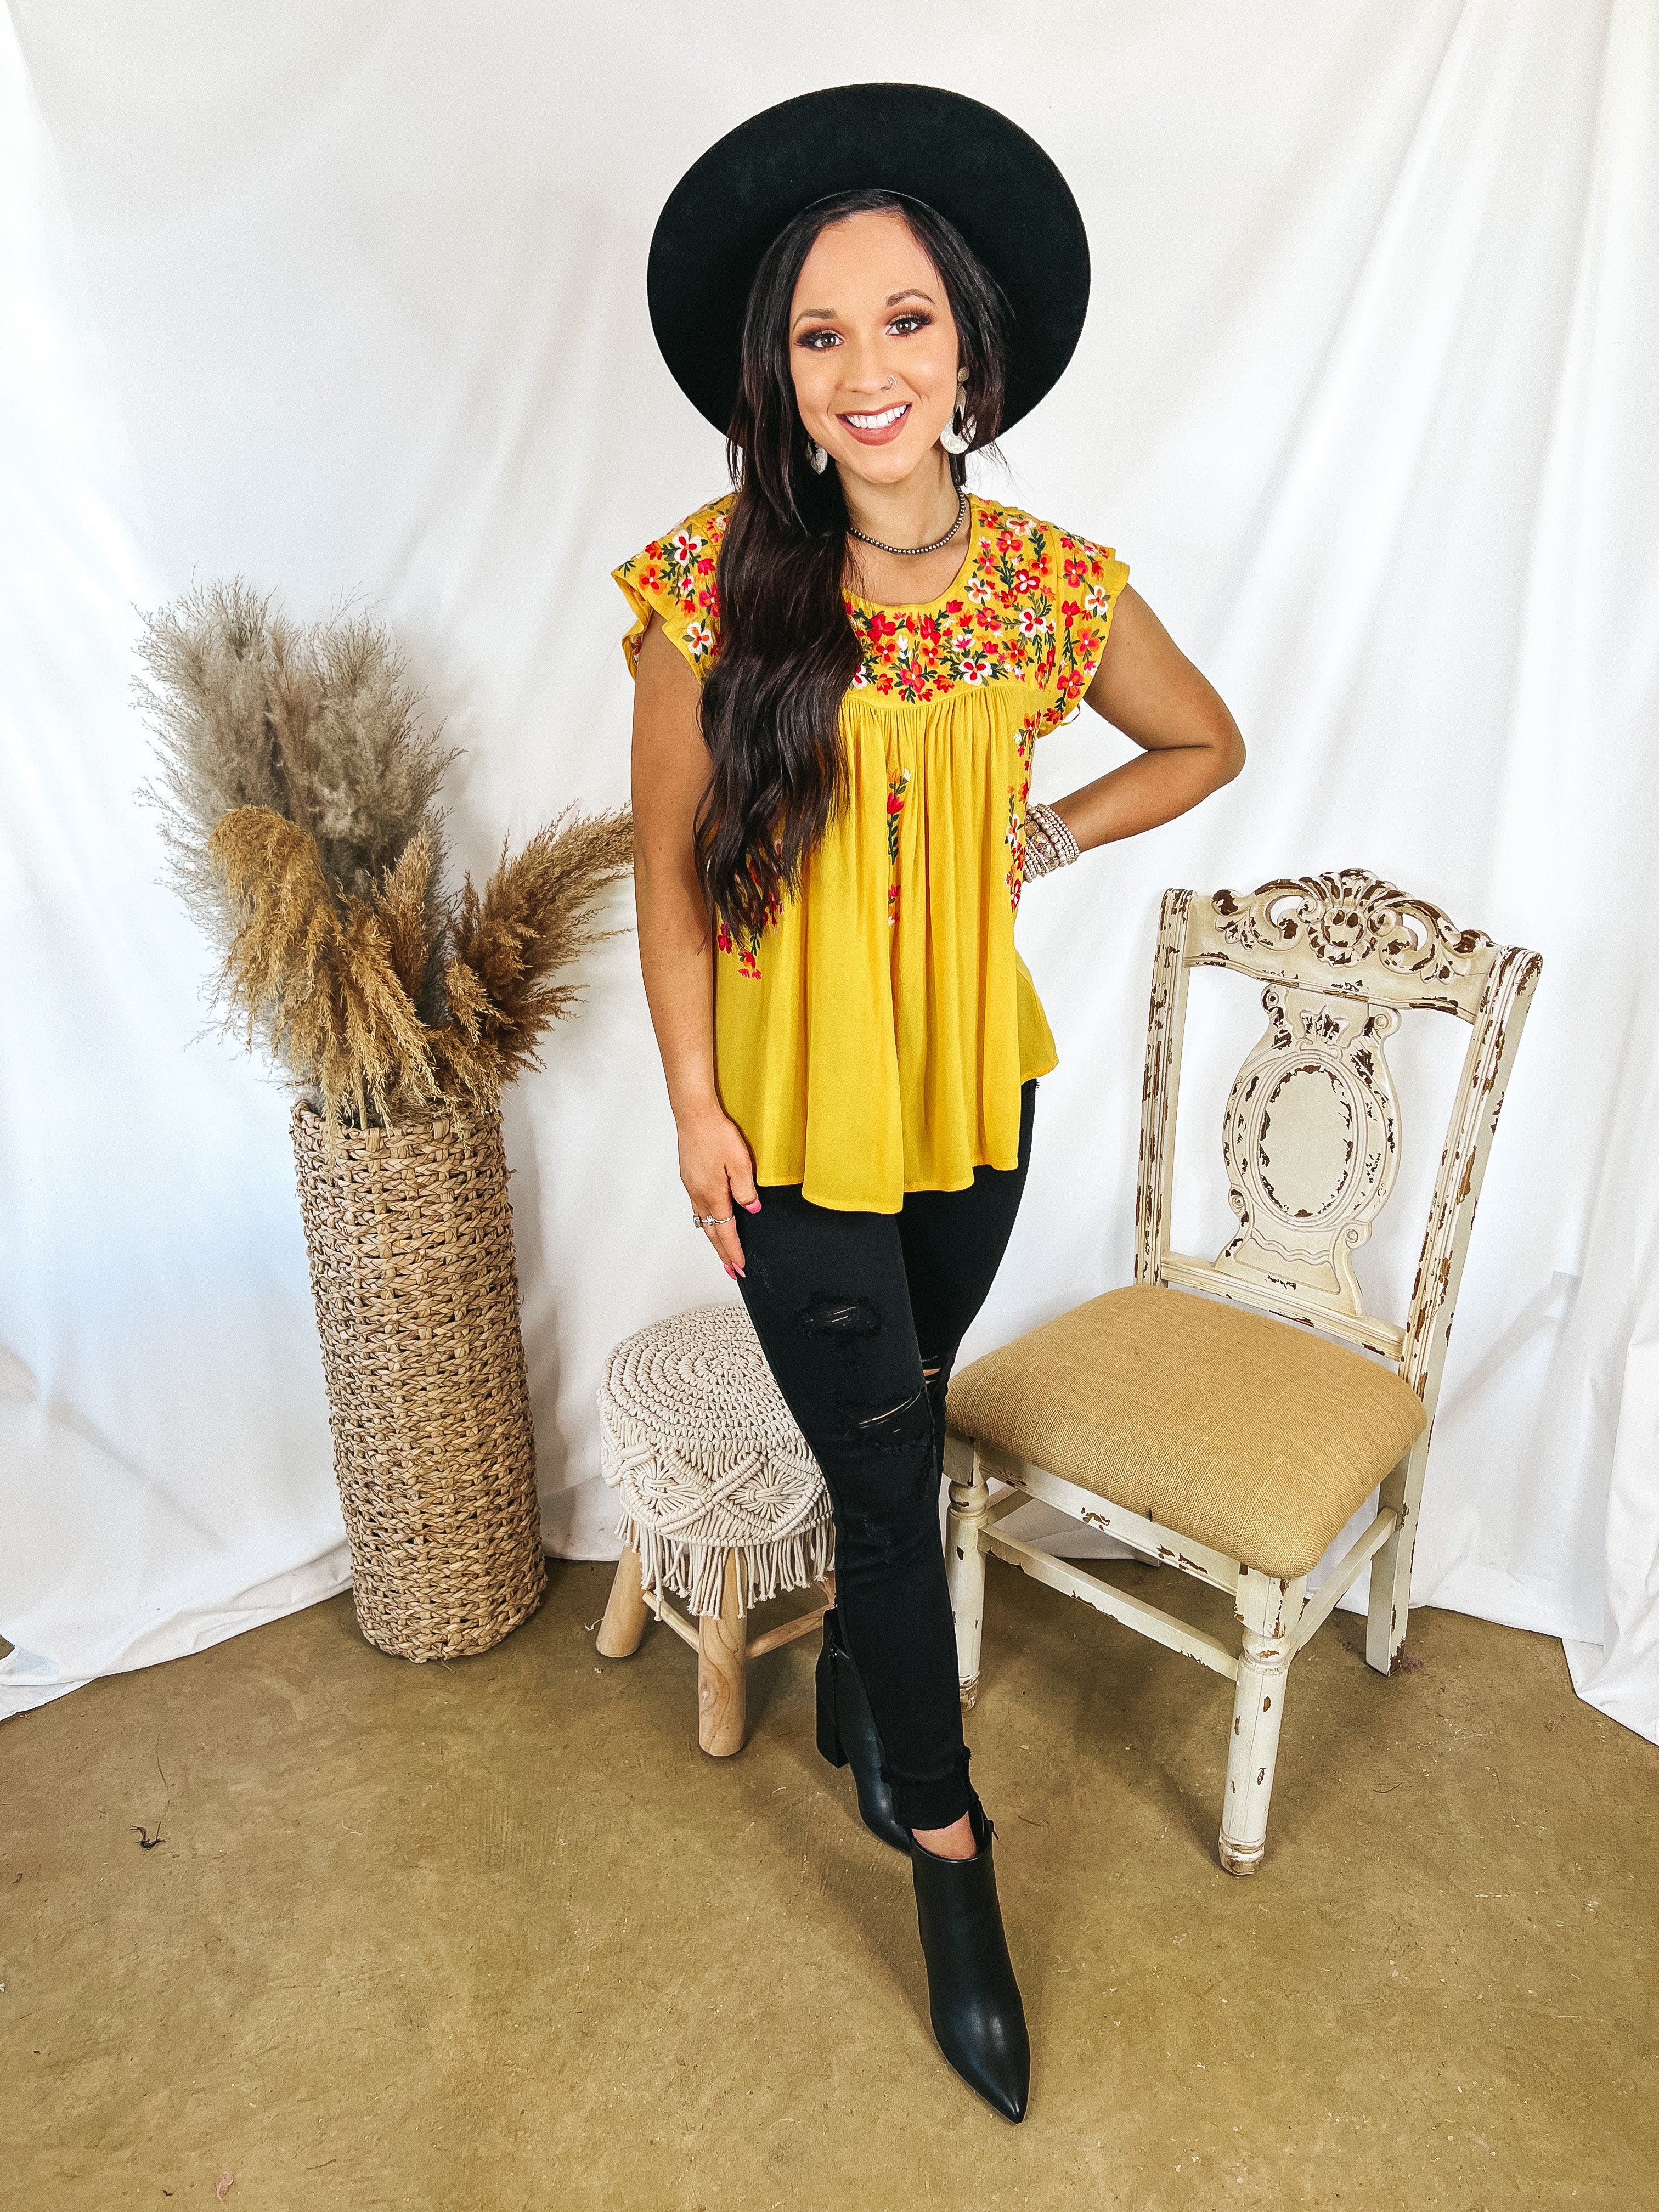 Lajitas Lady Floral Embroidered Babydoll Top in Yellow - Giddy Up Glamour Boutique